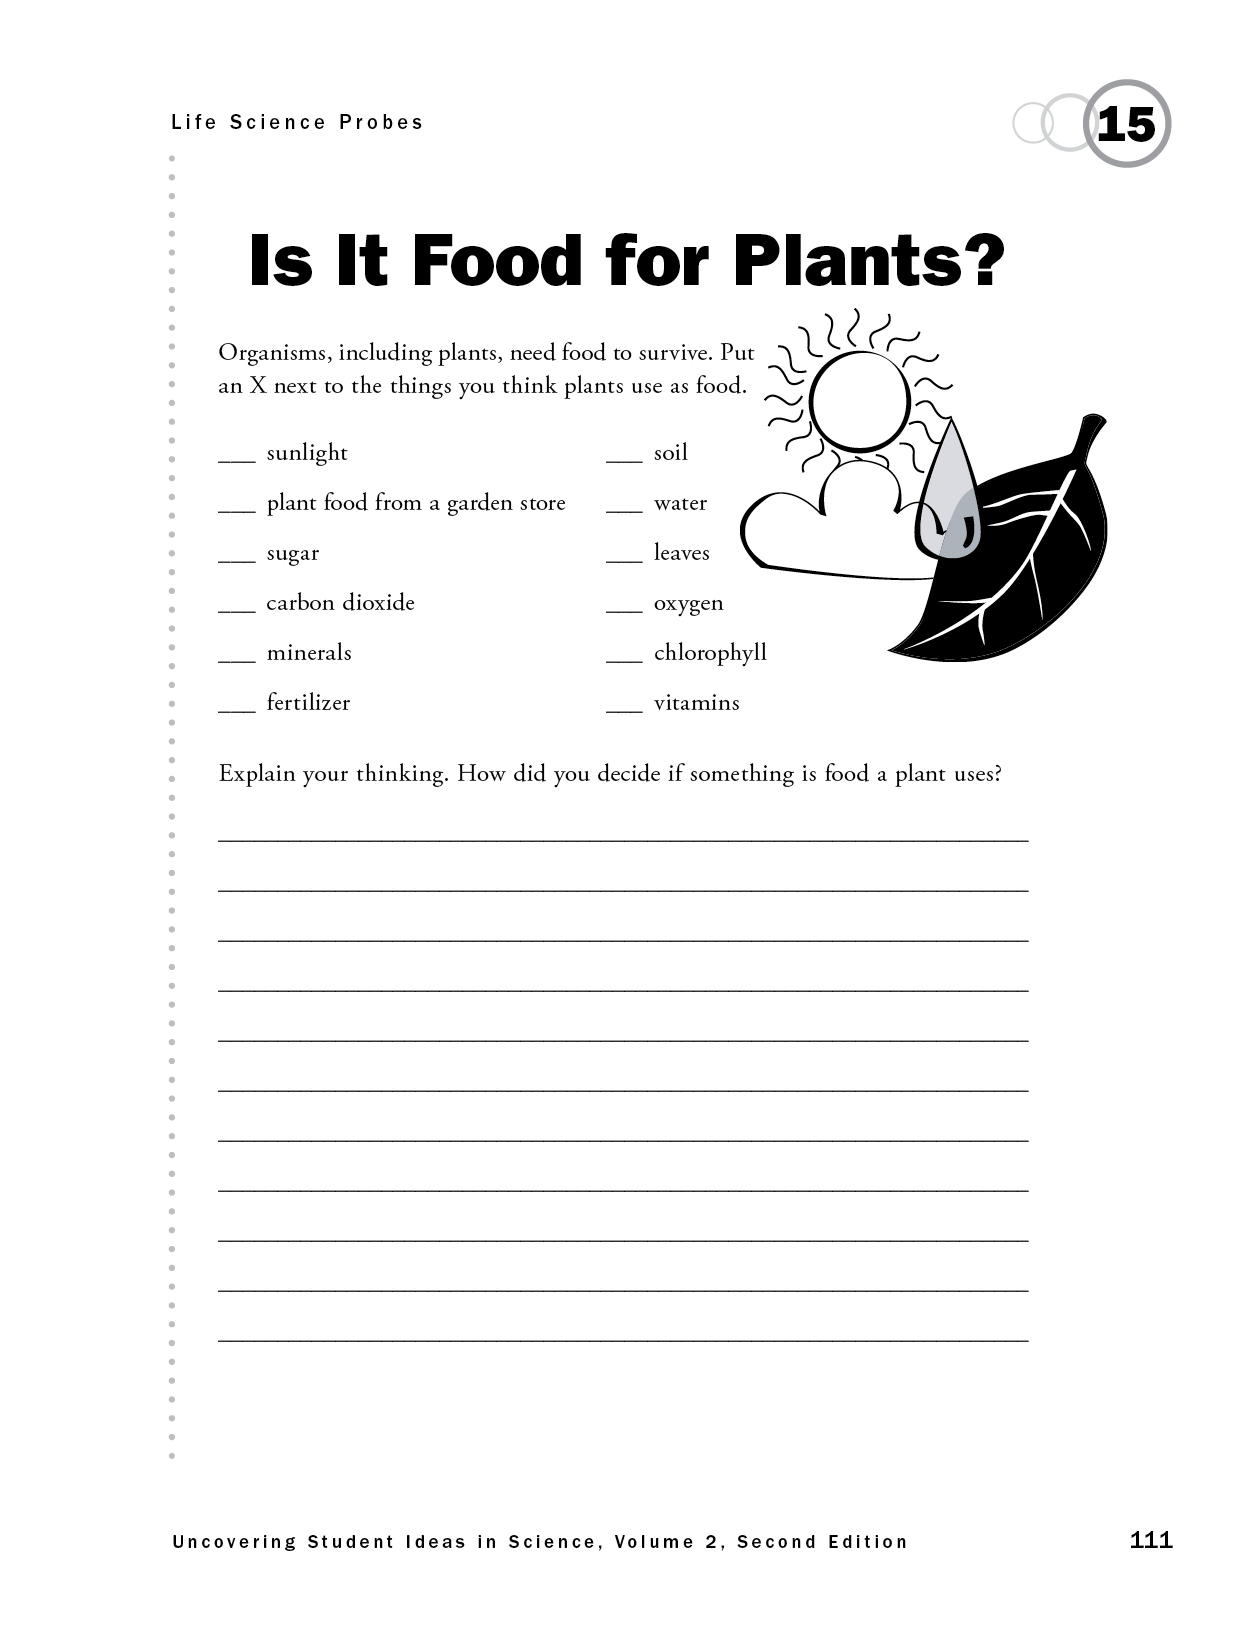 Is It Food for Plants?